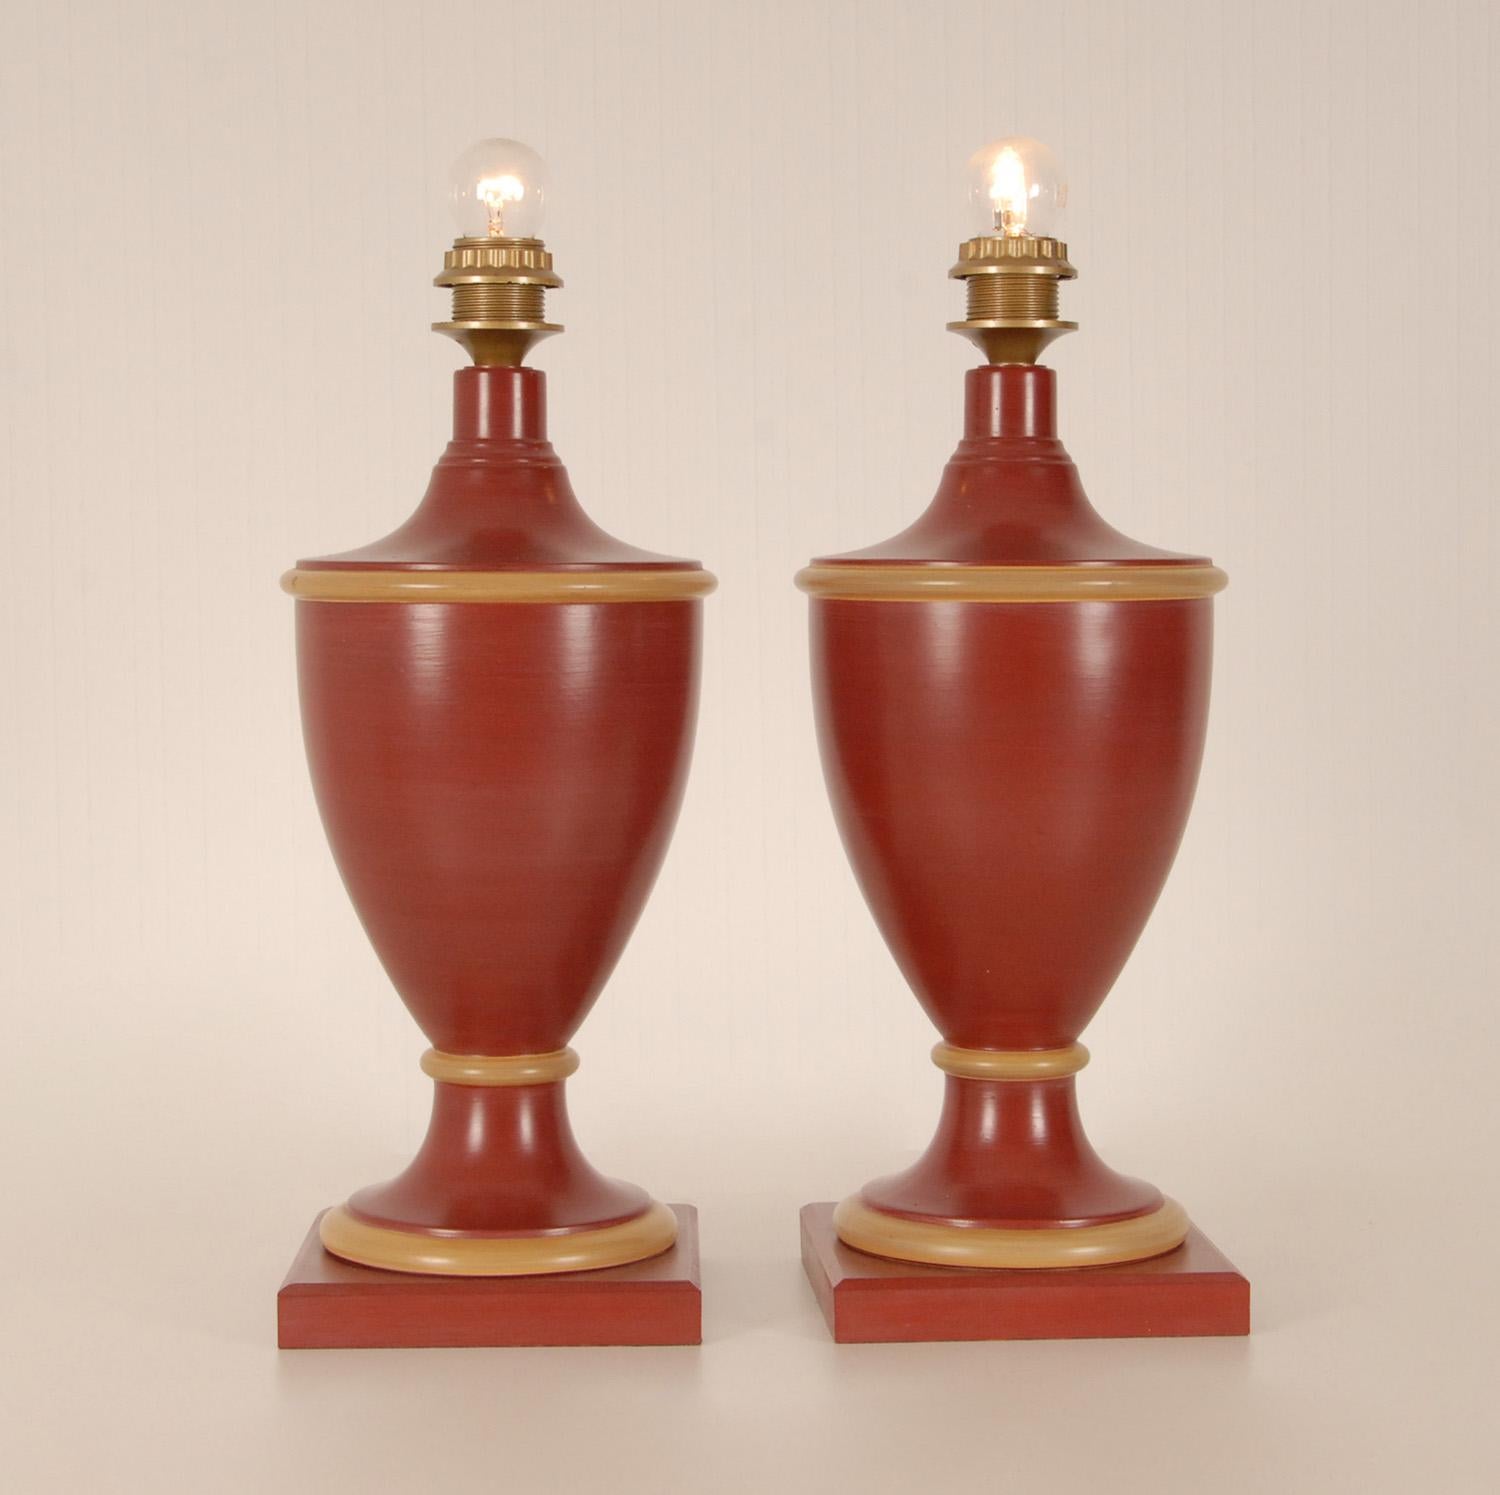 Vintage French Ceramic Burgundy Red Table Lamps Buffet Vase Lamps, a Pair 1